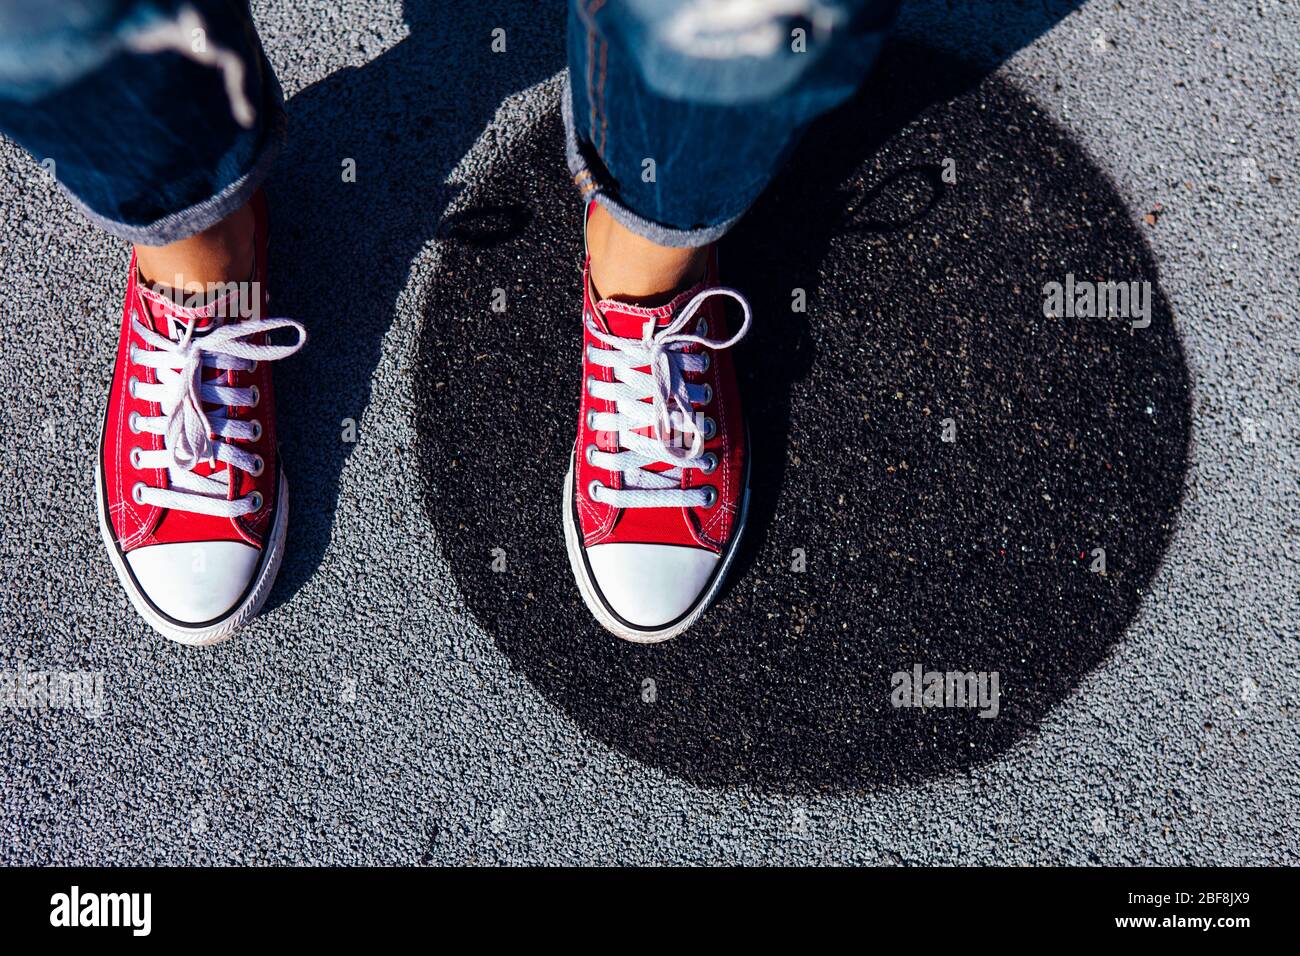 Red canvas sneakers shoes on woman's feet on the asphalt with black ...